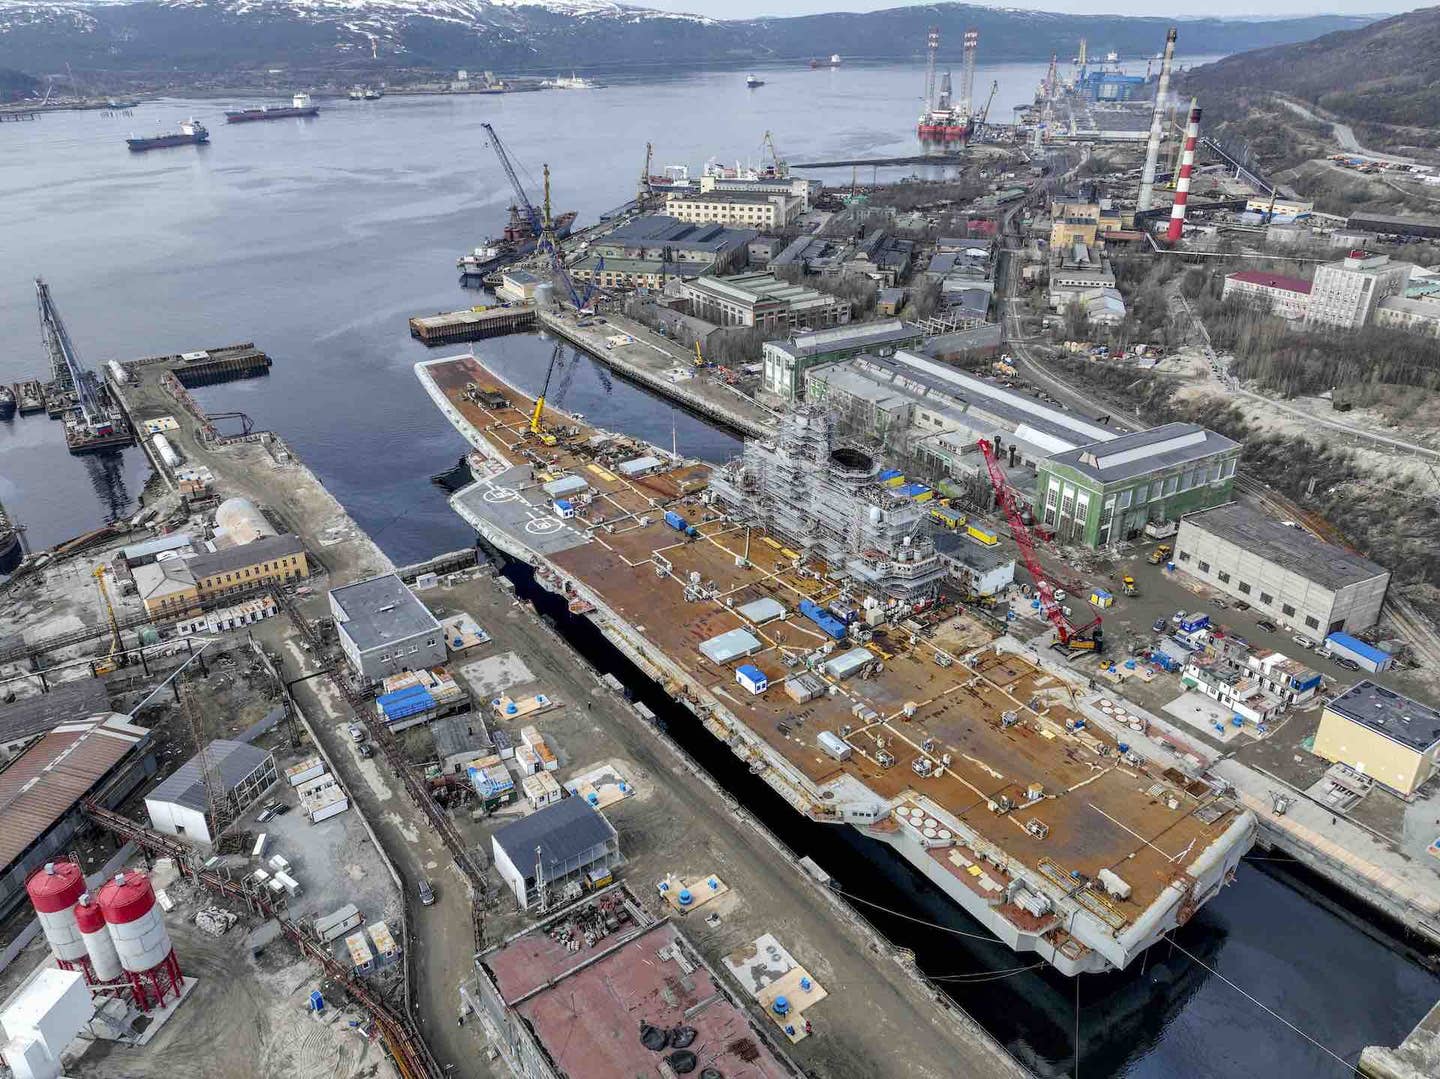 The Russian Navy's lone aircraft carrier, <em>Admiral Kuznetsov</em>, is towed to the 35th squadron shipyard for maintenance and repair works in Murmansk, Russia on May 20, 2022. <em>Photo by Semen Vasileyev/Anadolu Agency via Getty Images</em>